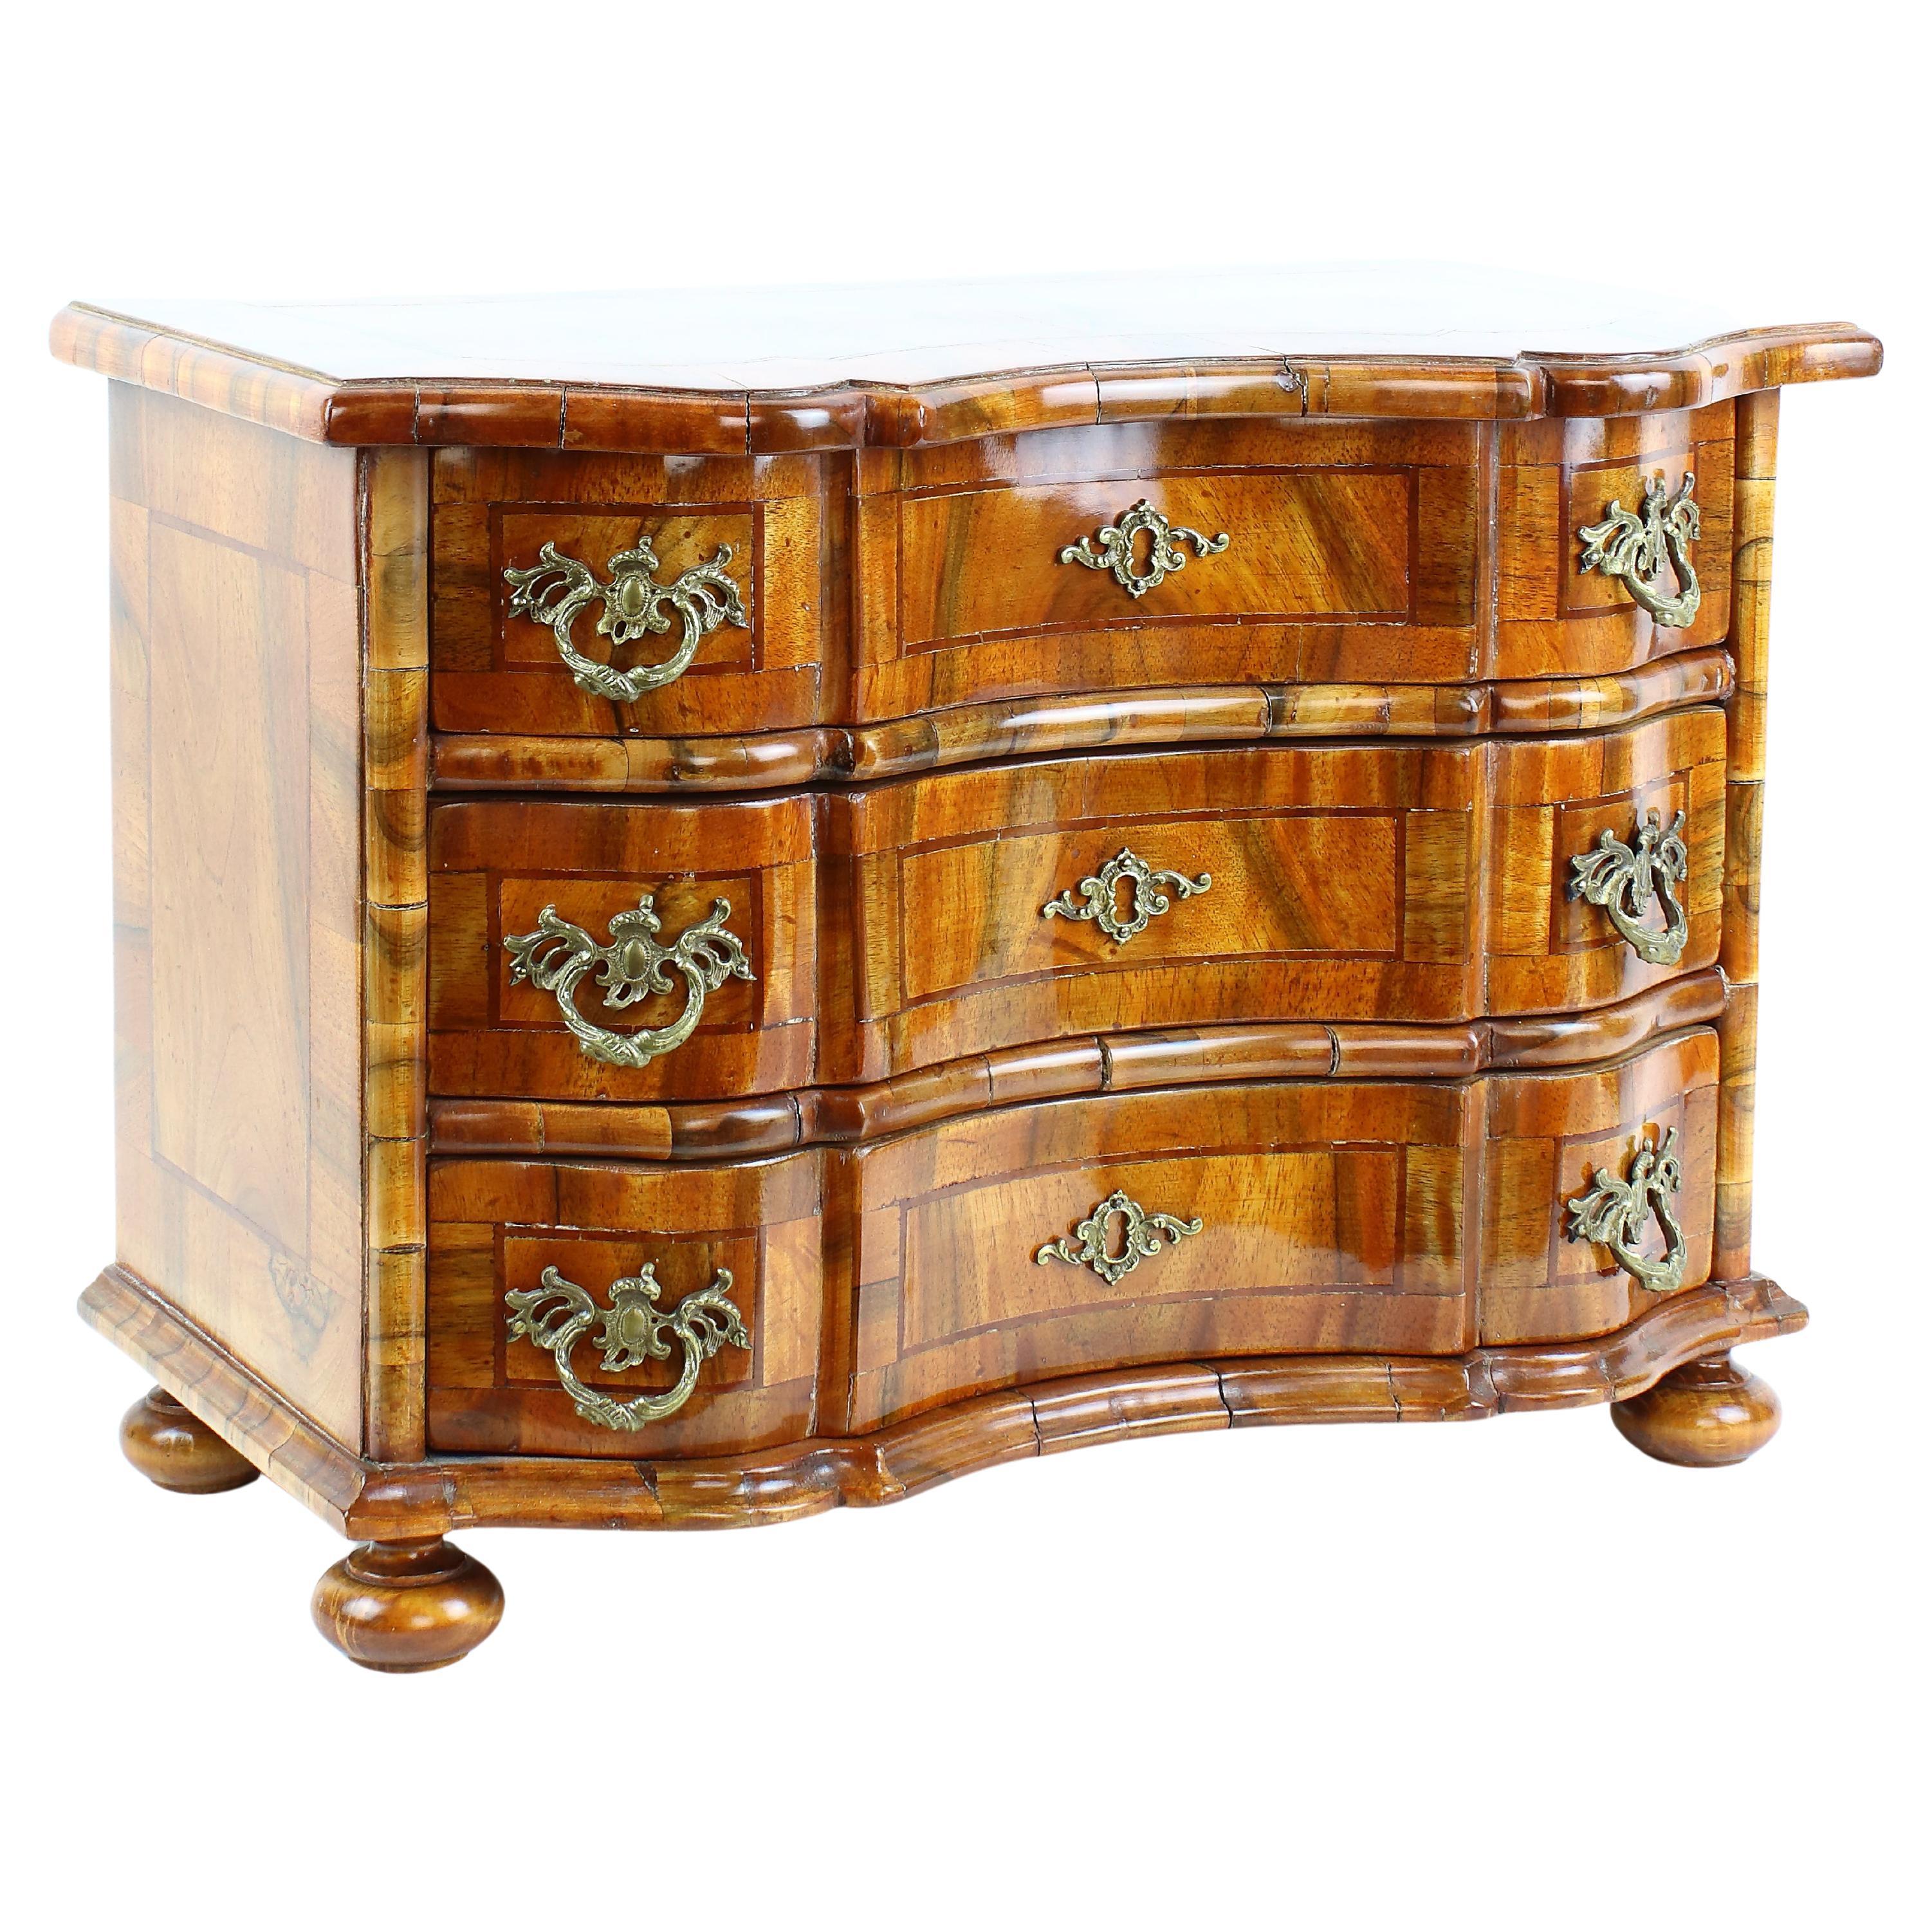 German Saxonian Baroque Style Walnut Veneer Chest of Drawers or Commode